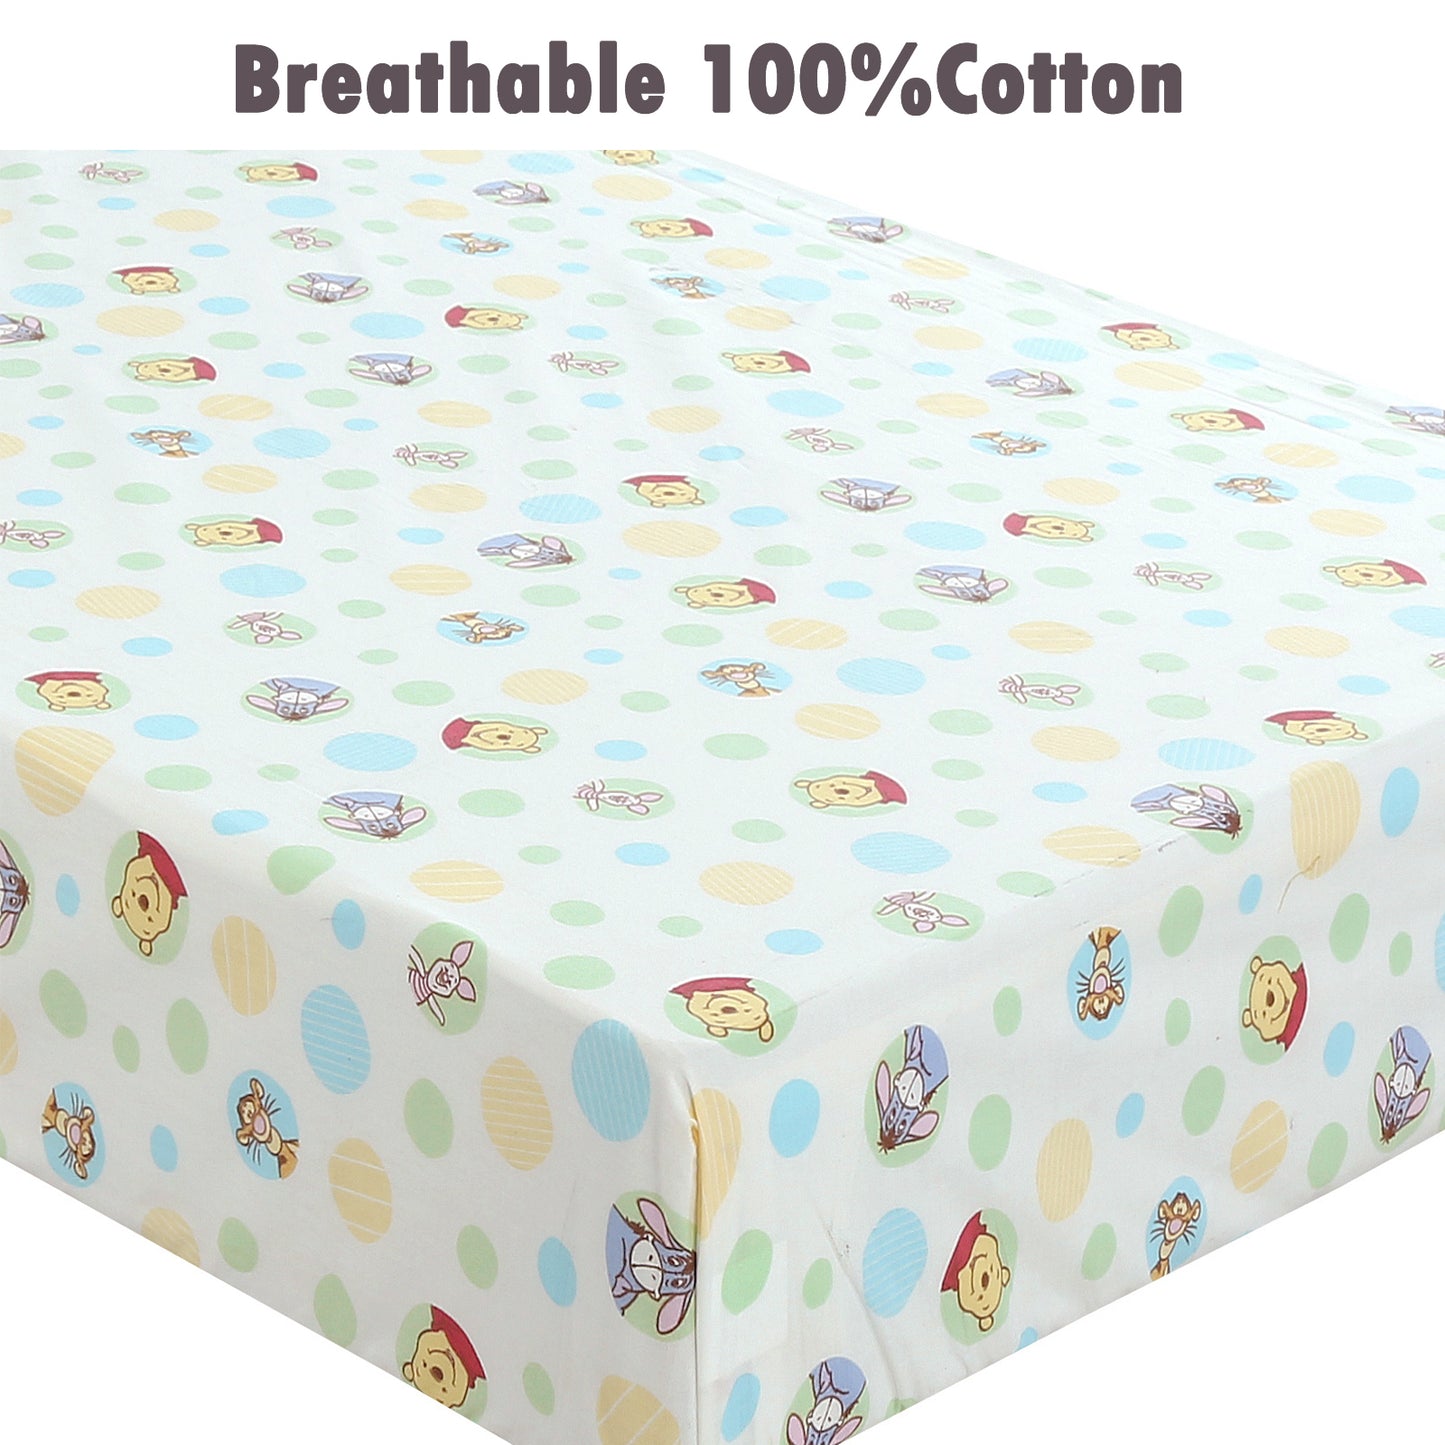 3 Piece Crib/Toddler Cotton Fitted Sheets ColorfulPooh Bear & Farm Animal Friends